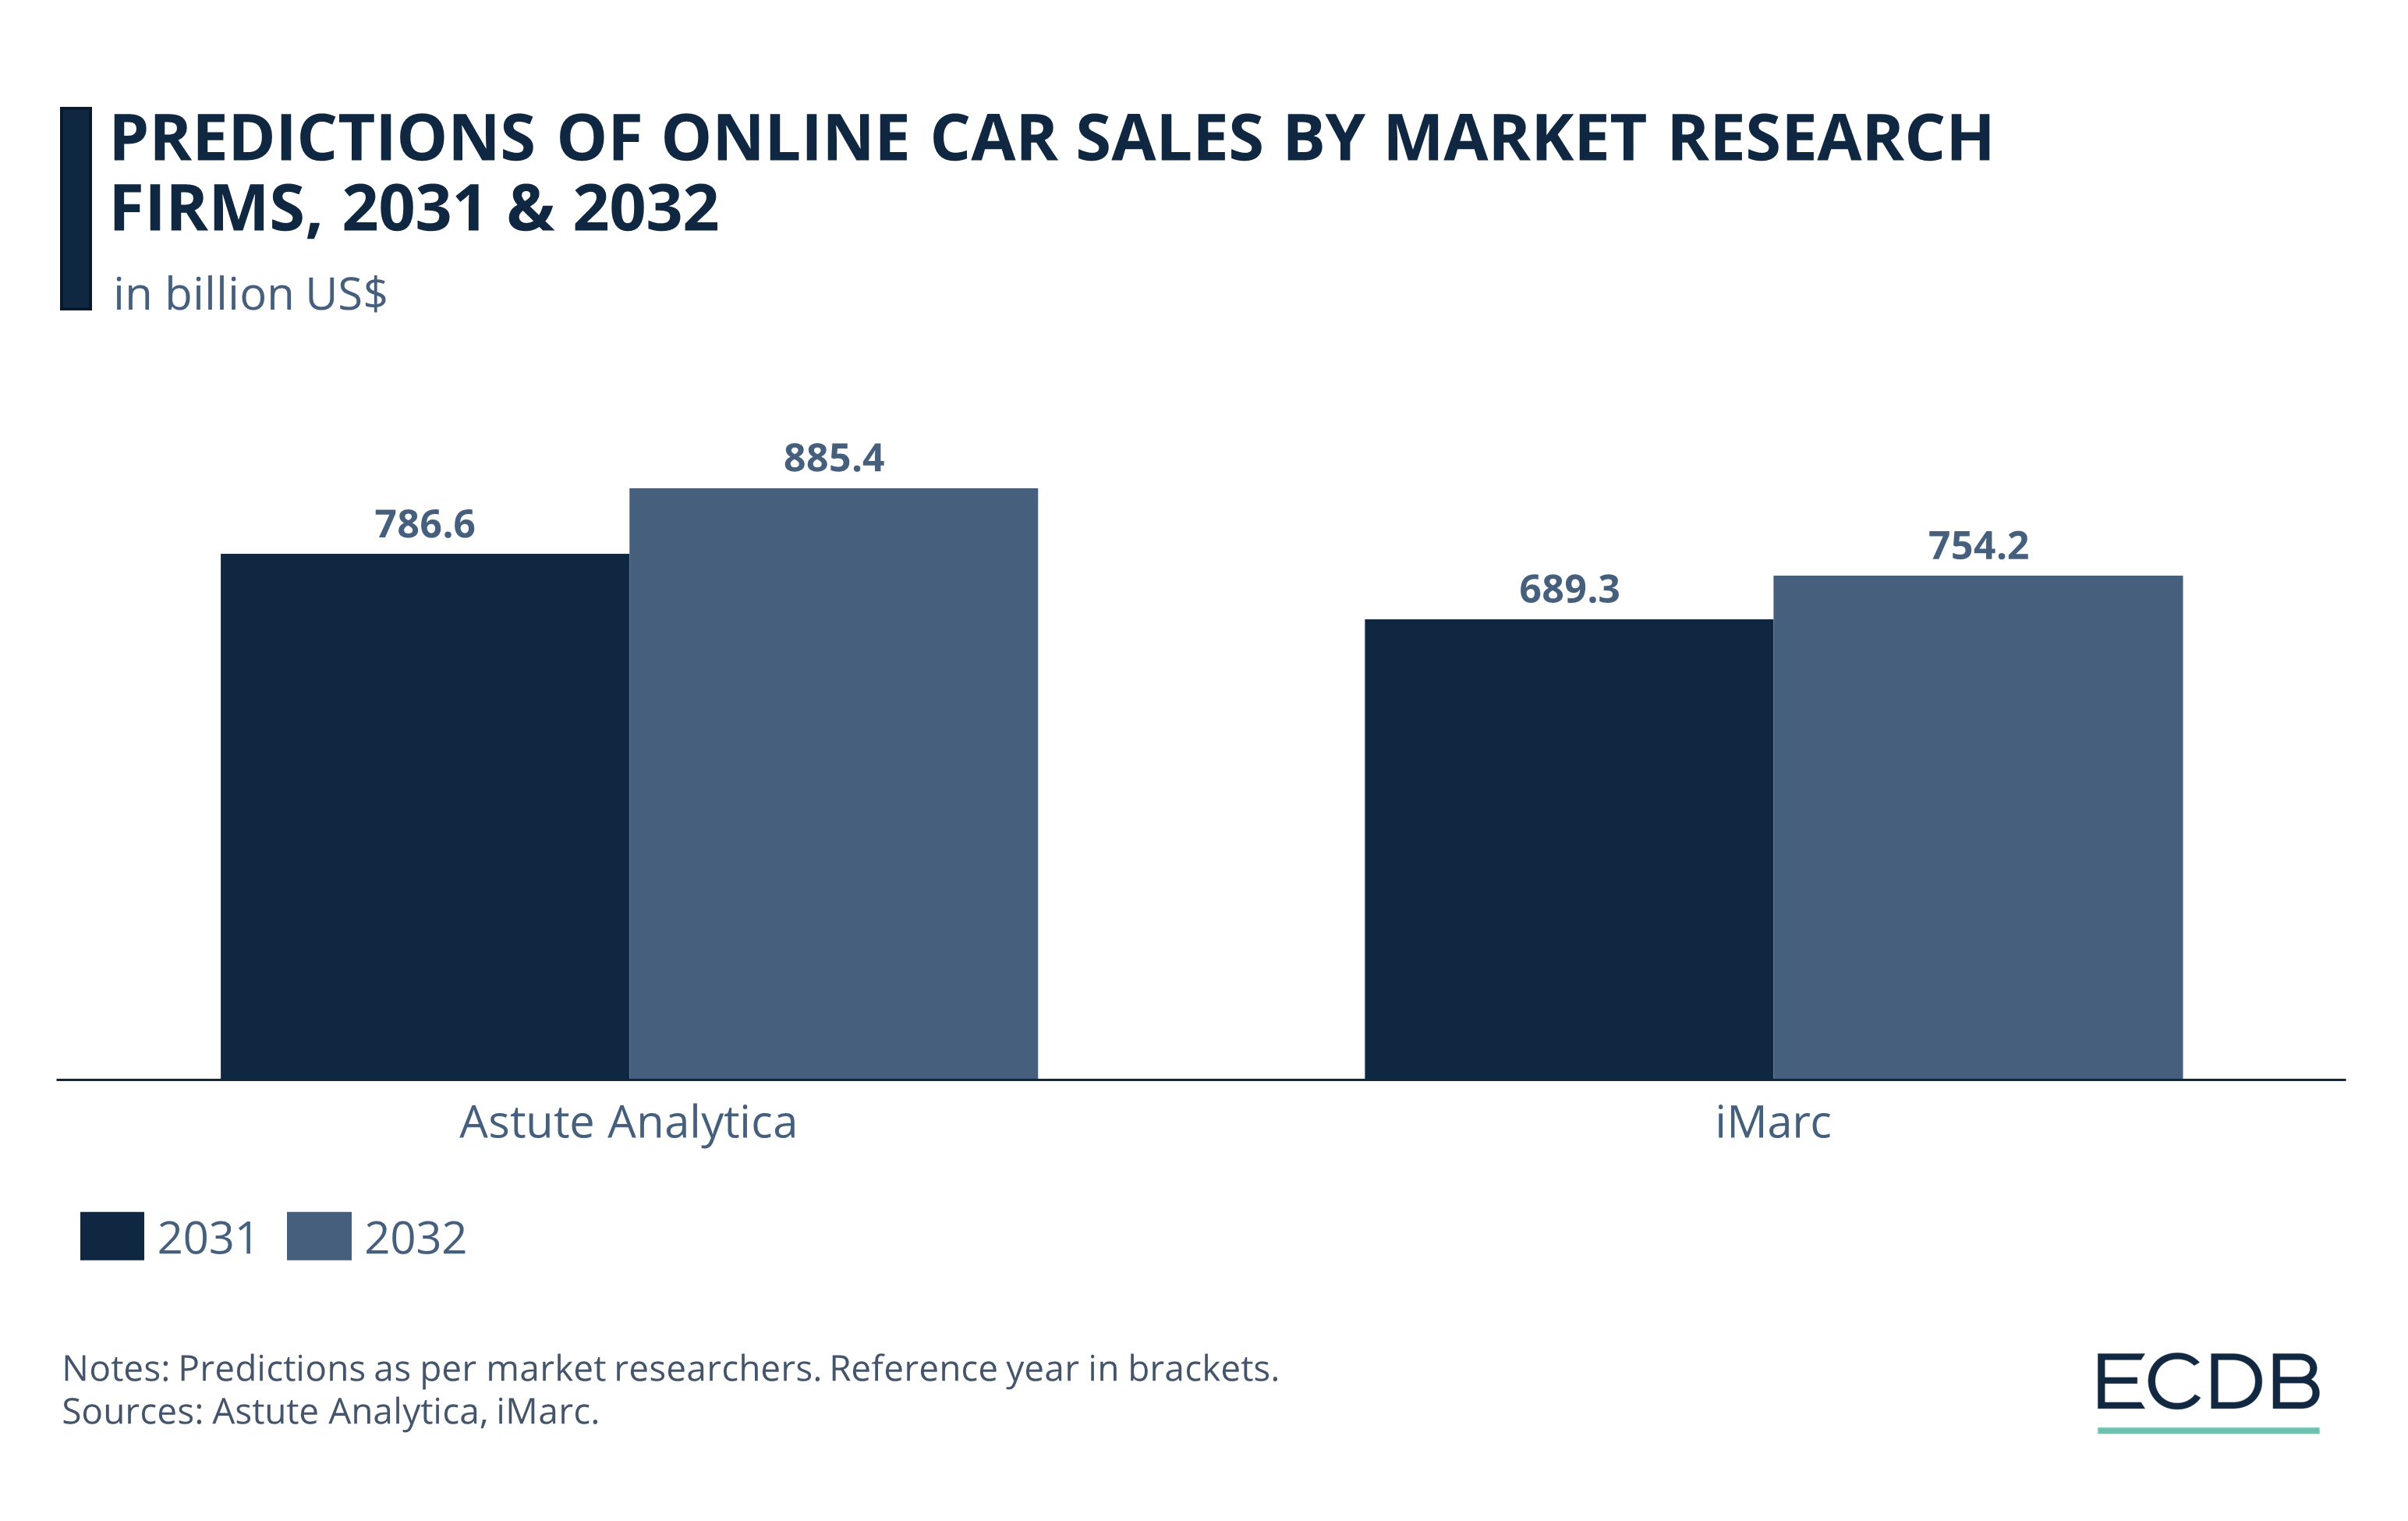 Predictions of Online Car Sales by Market Research Firms, 2031 & 2032